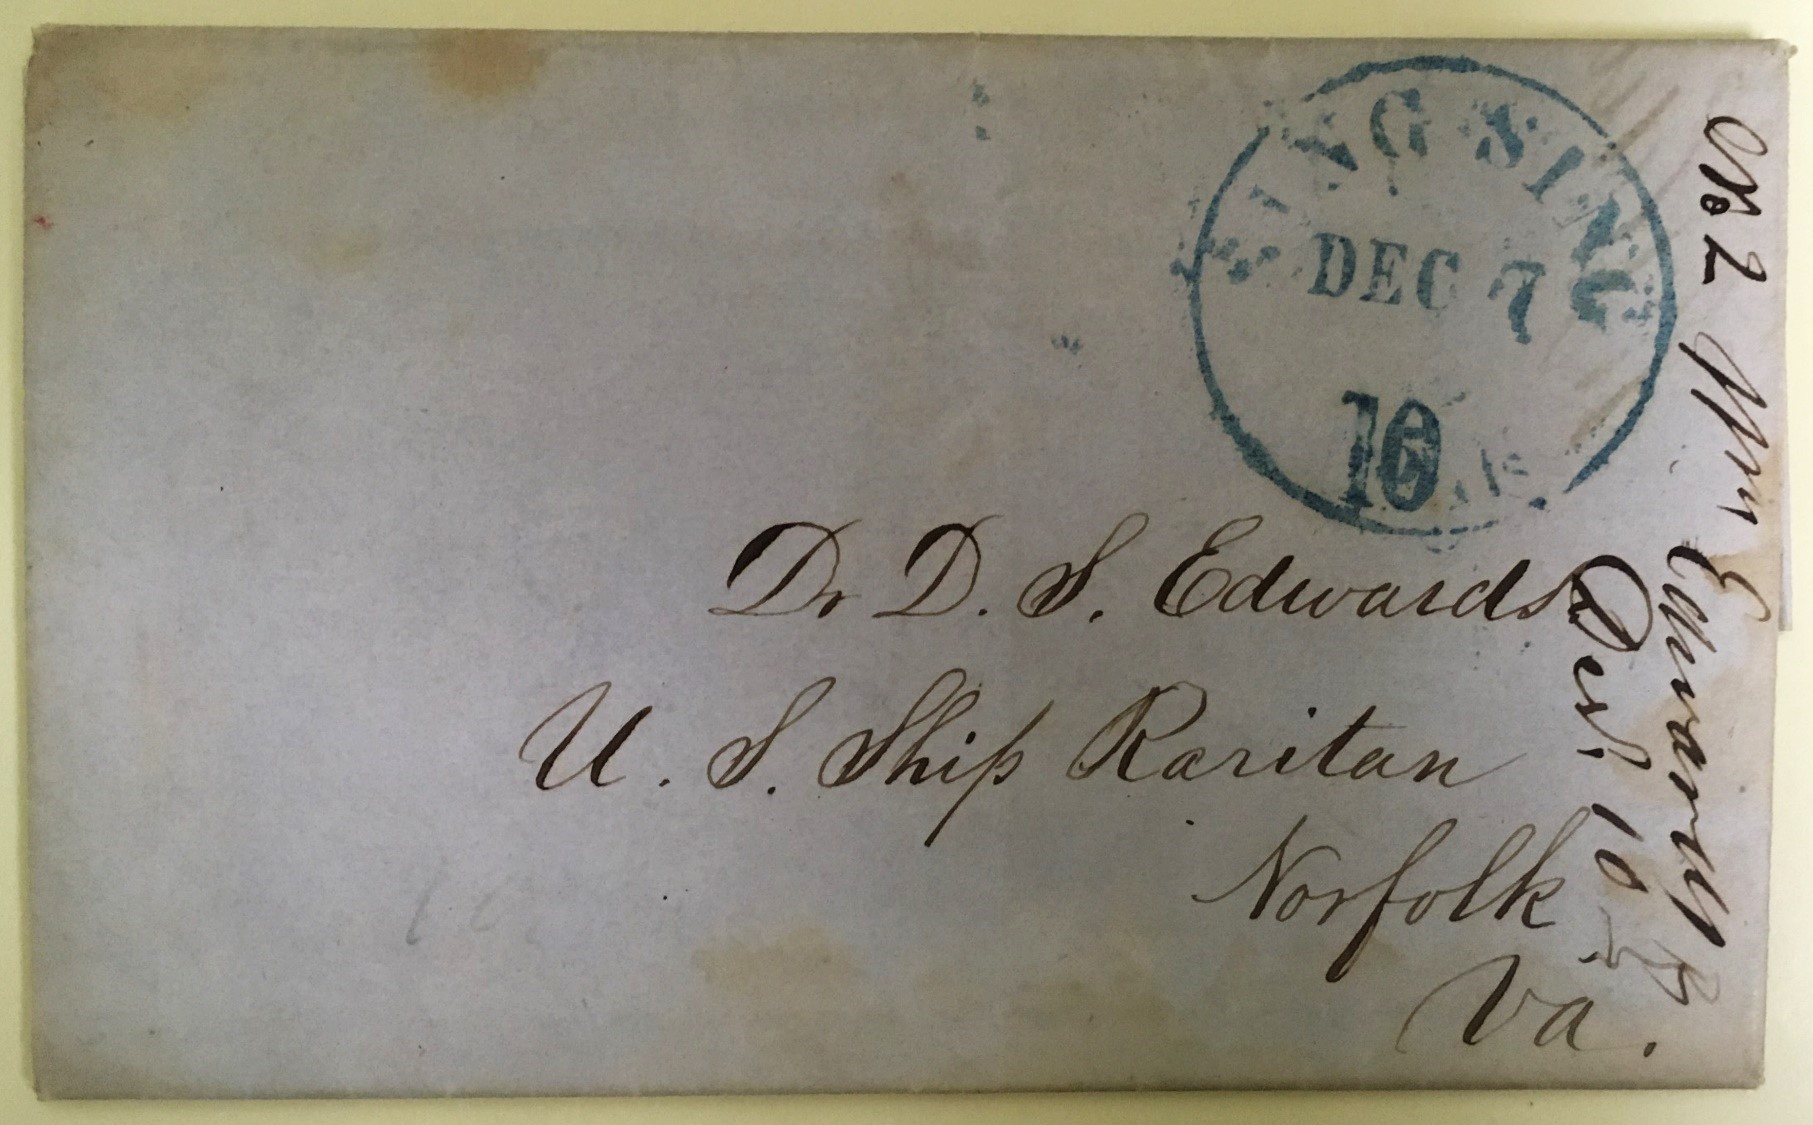 Image of old envelope that has faded to a dull grey color. Delicate cursive adorns the envelope, and a green circular cancel stamp.